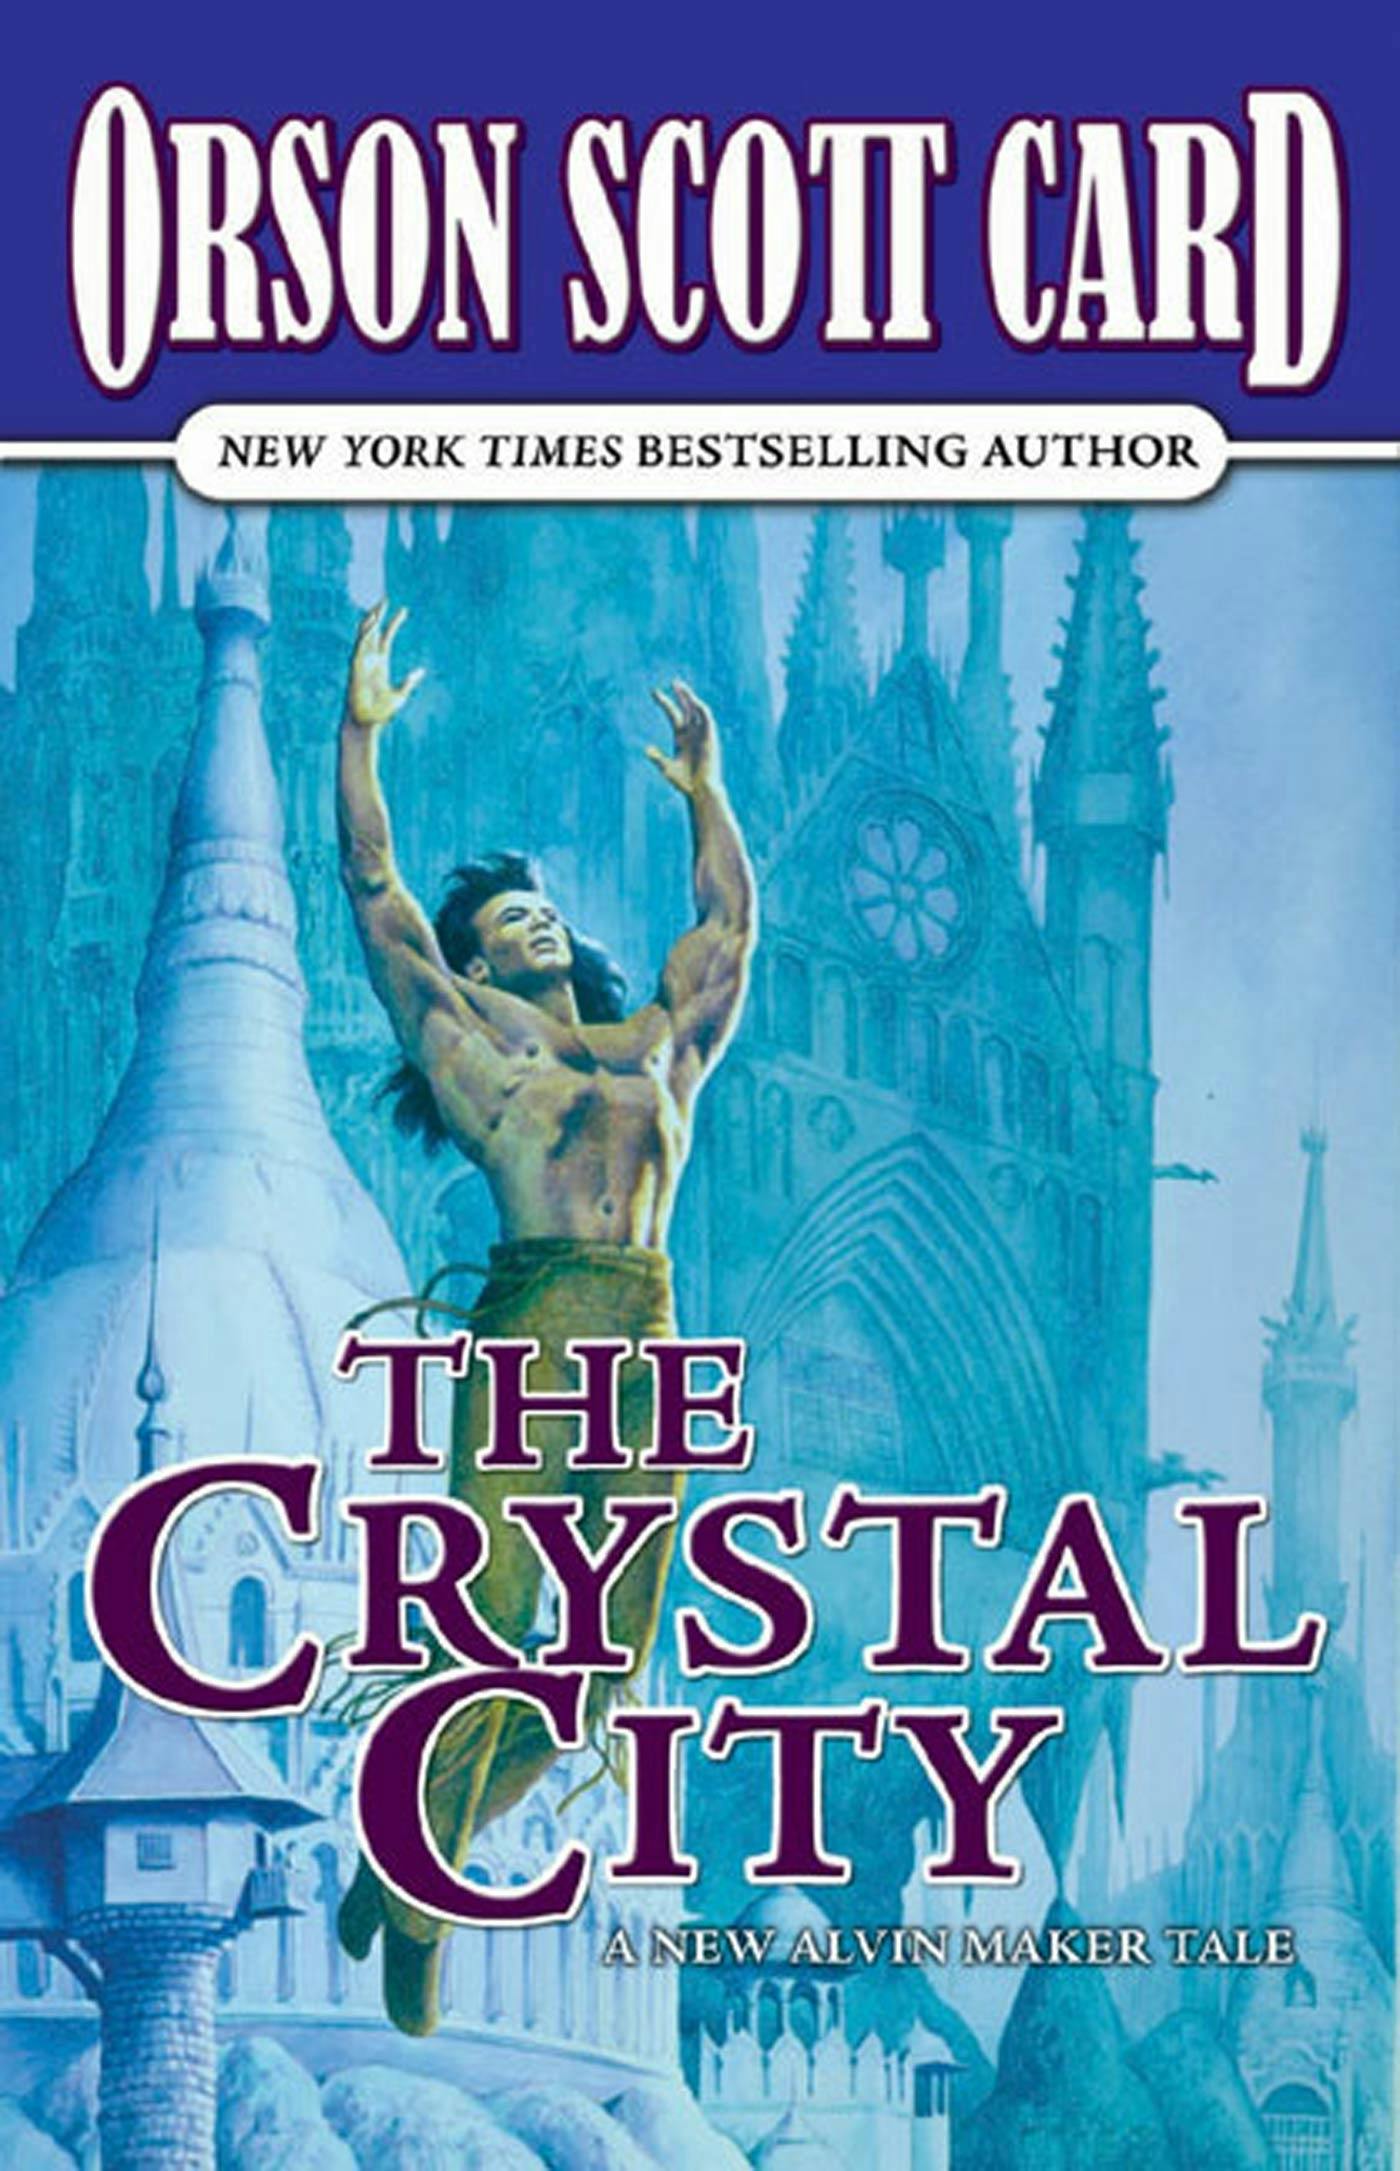 Cover for the book titled as: The Crystal City